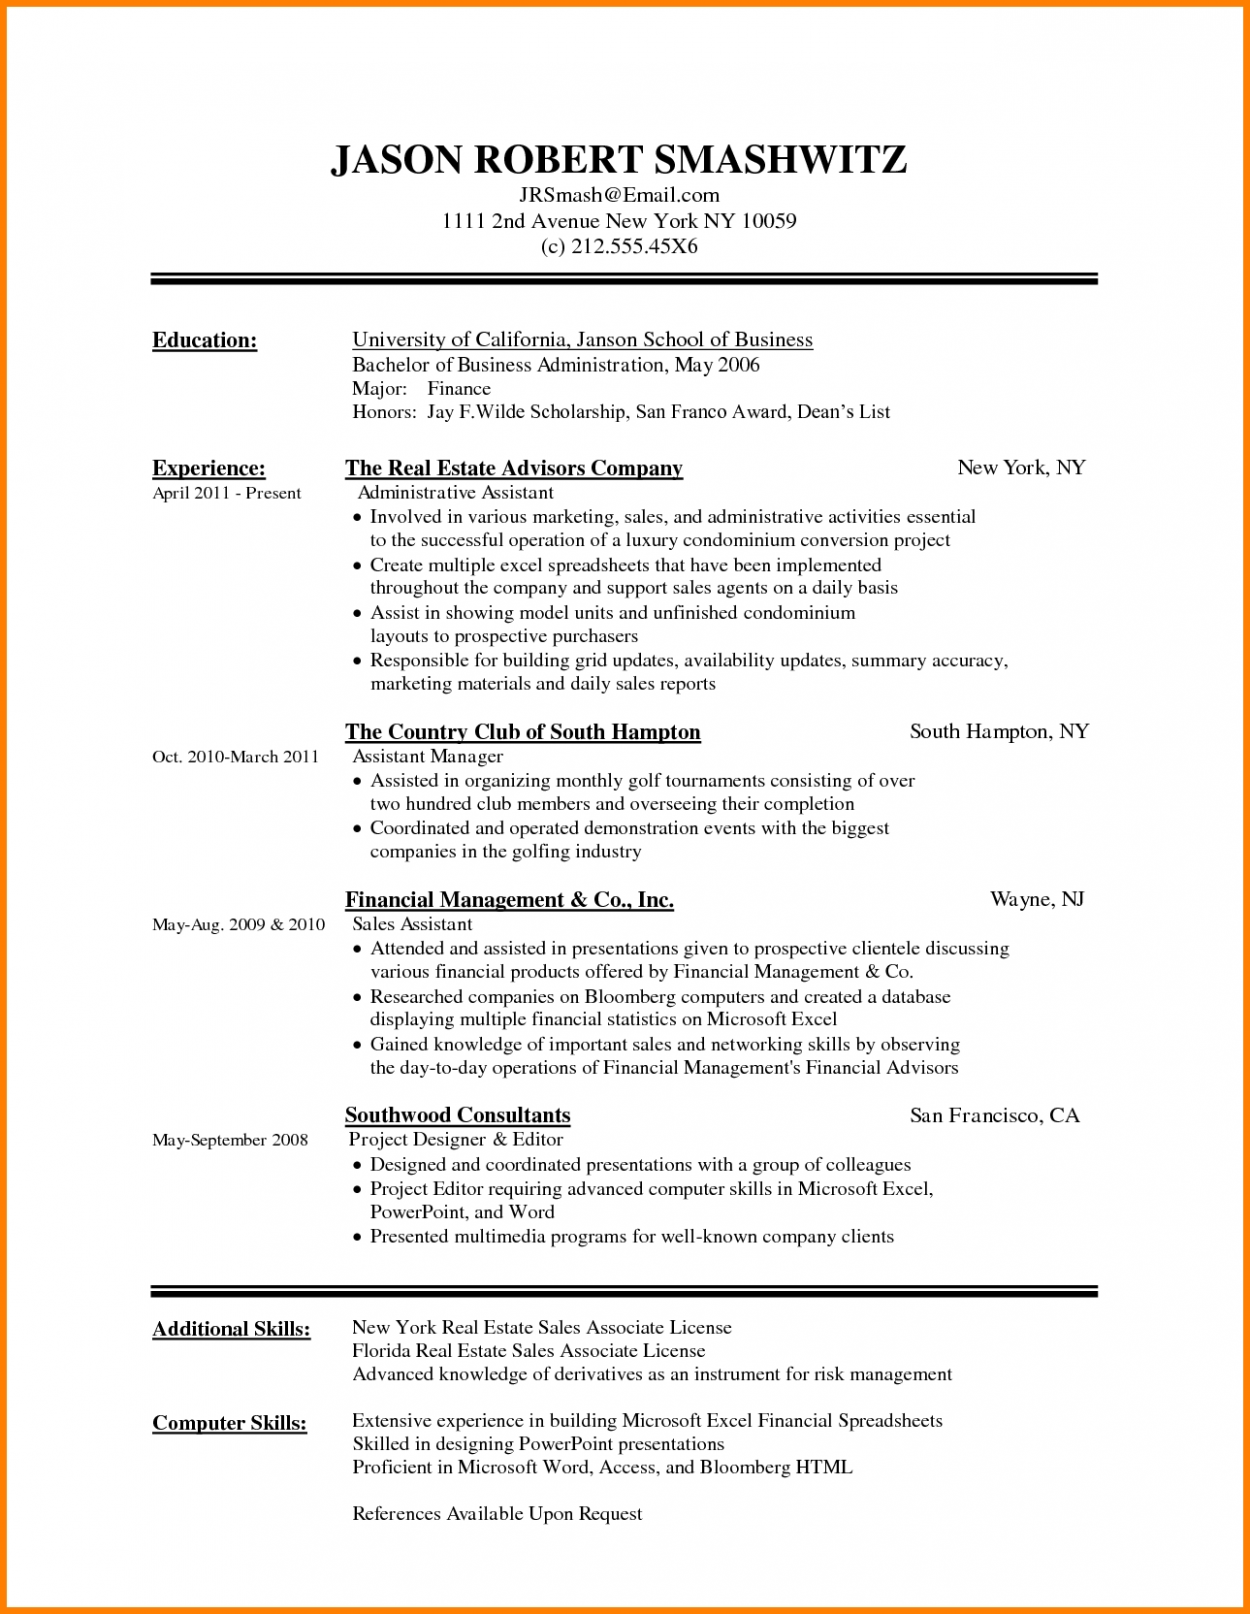 Free Downloadable Resume Templates Free Download Resume Templates Lovely Resume Template Newsletter Free Downloadable Resume Templates For Word free downloadable resume templates|wikiresume.com